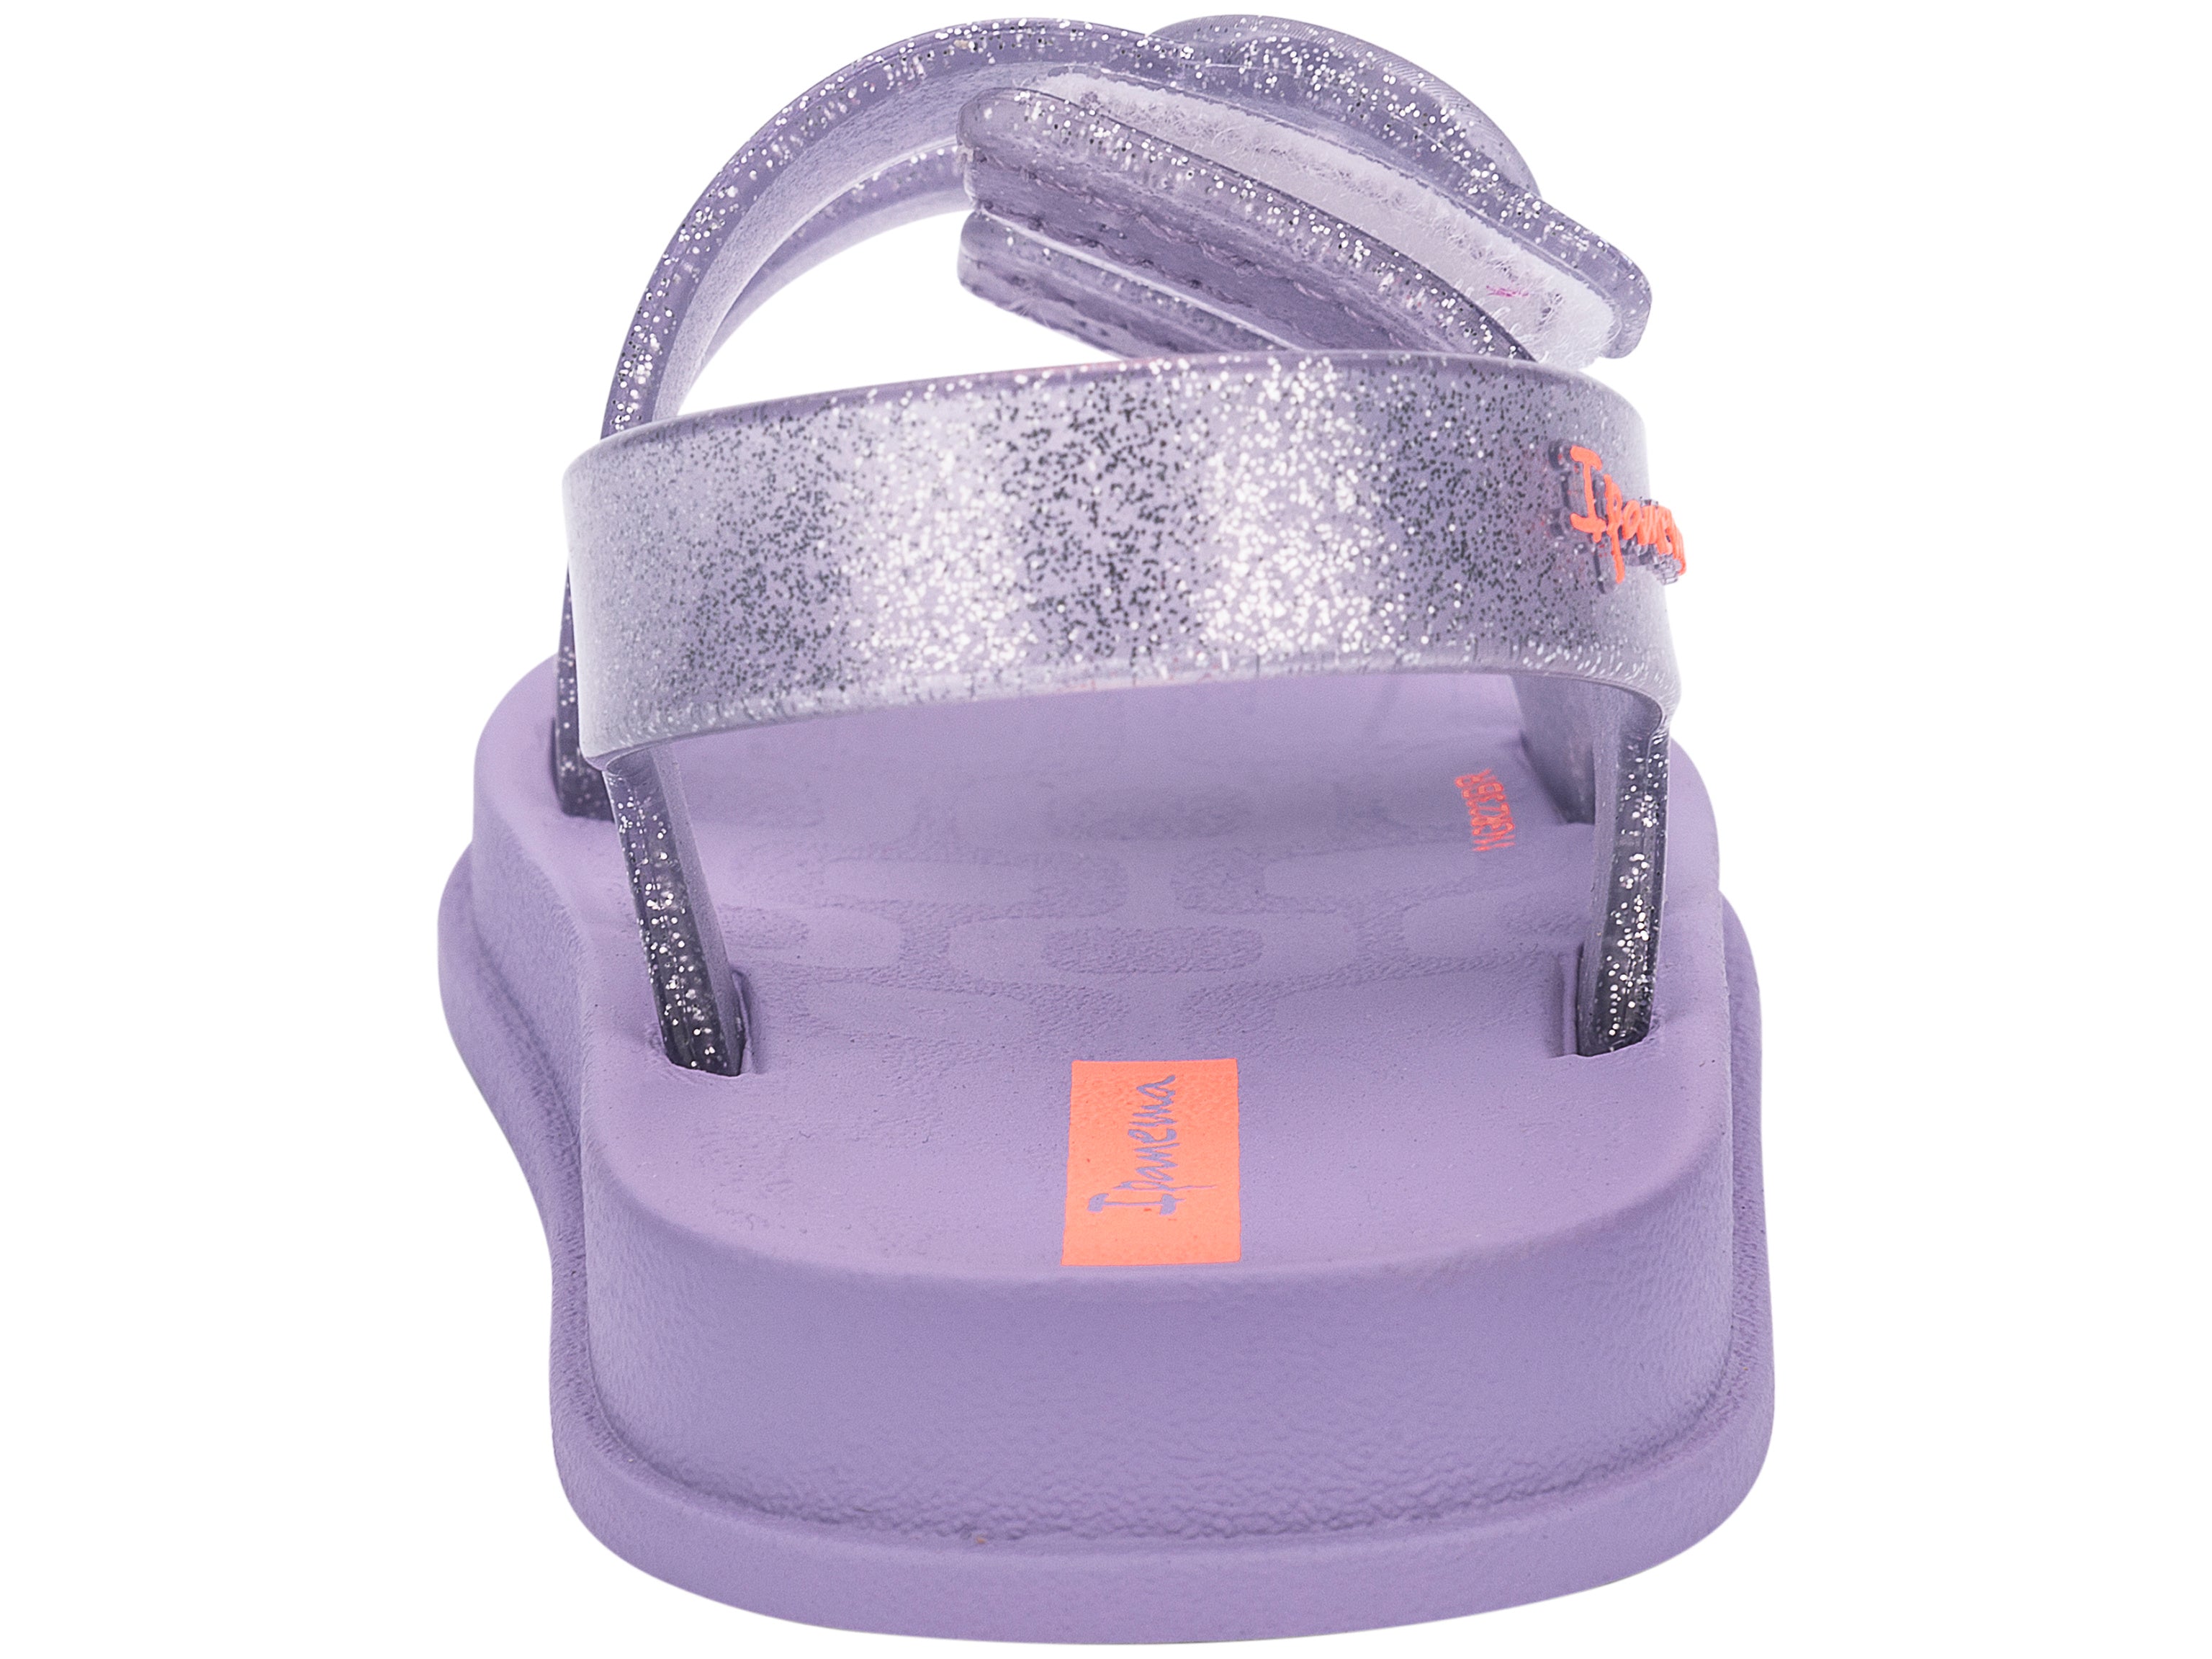 Back view of a purple Ipanema Follow baby sandal with two decorative buckles on the upper.